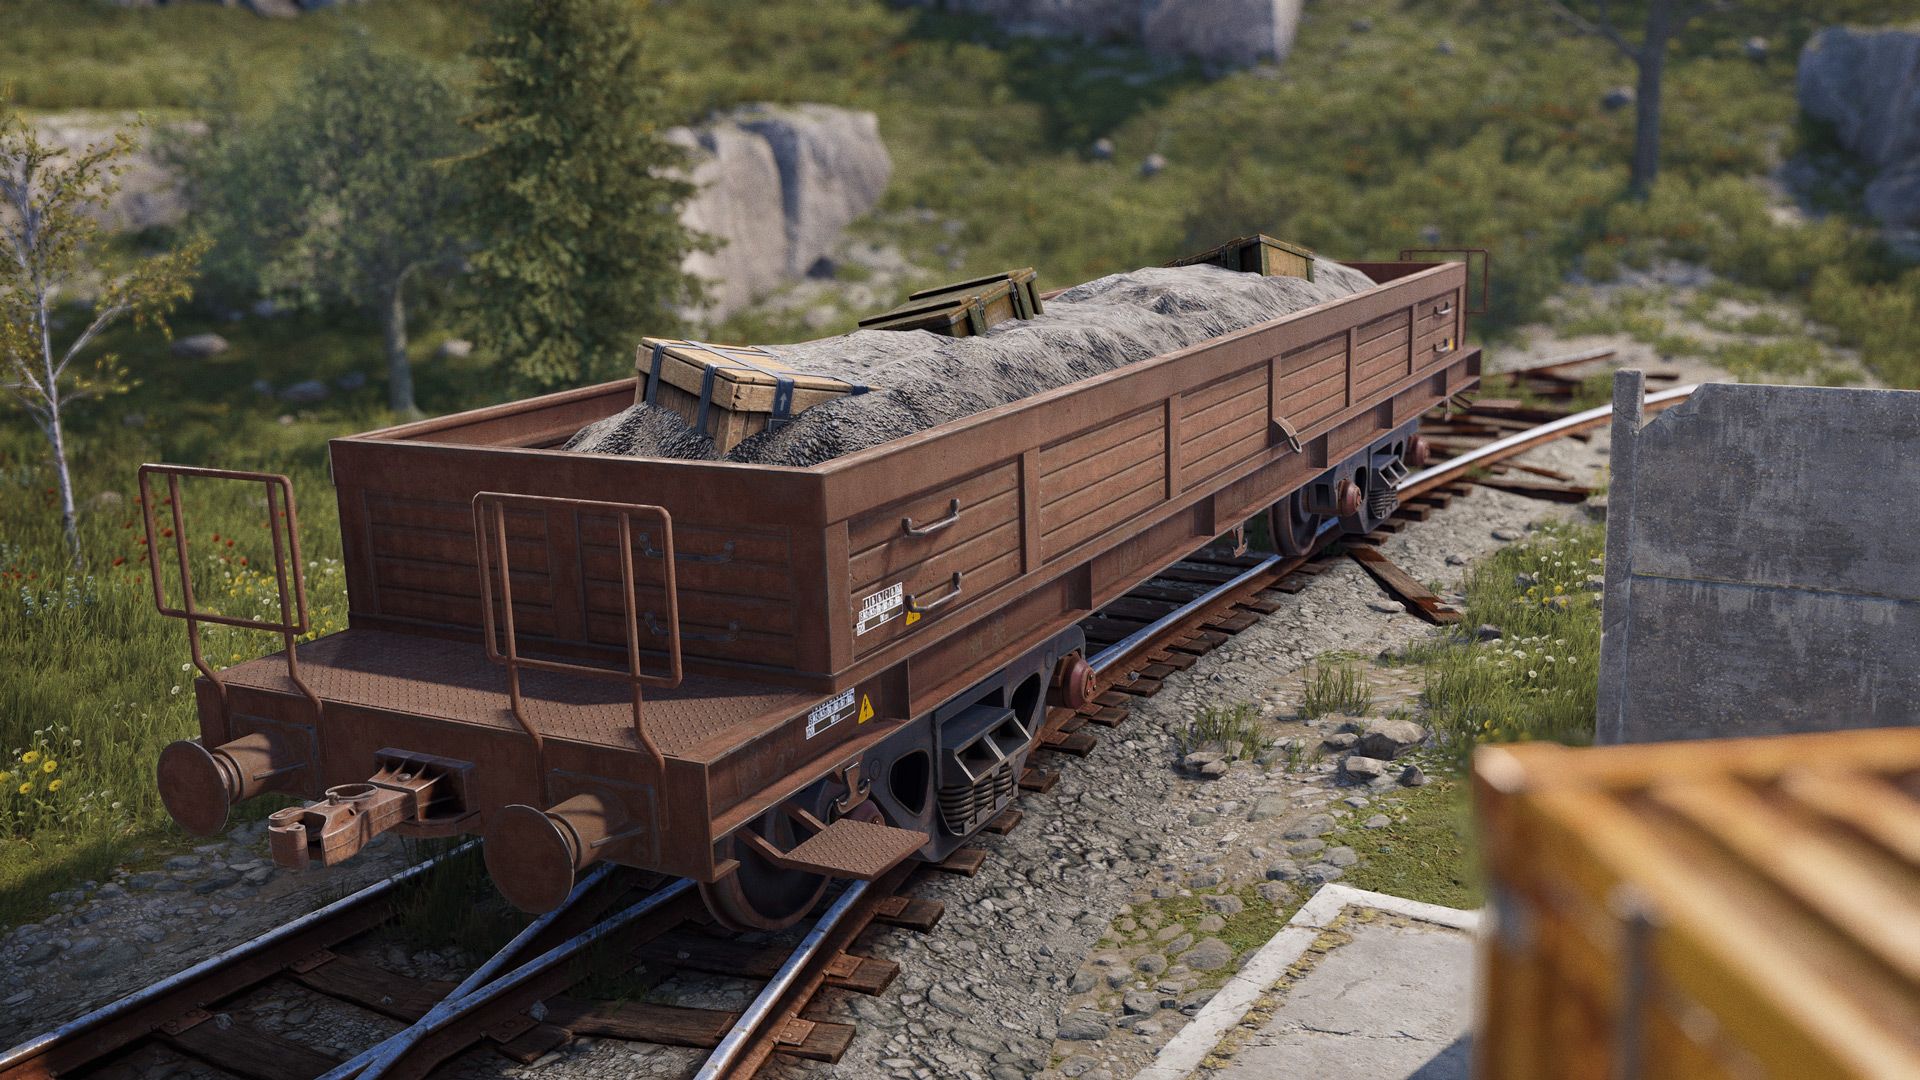 Image from Rust showing a train wagon with some crates inside.